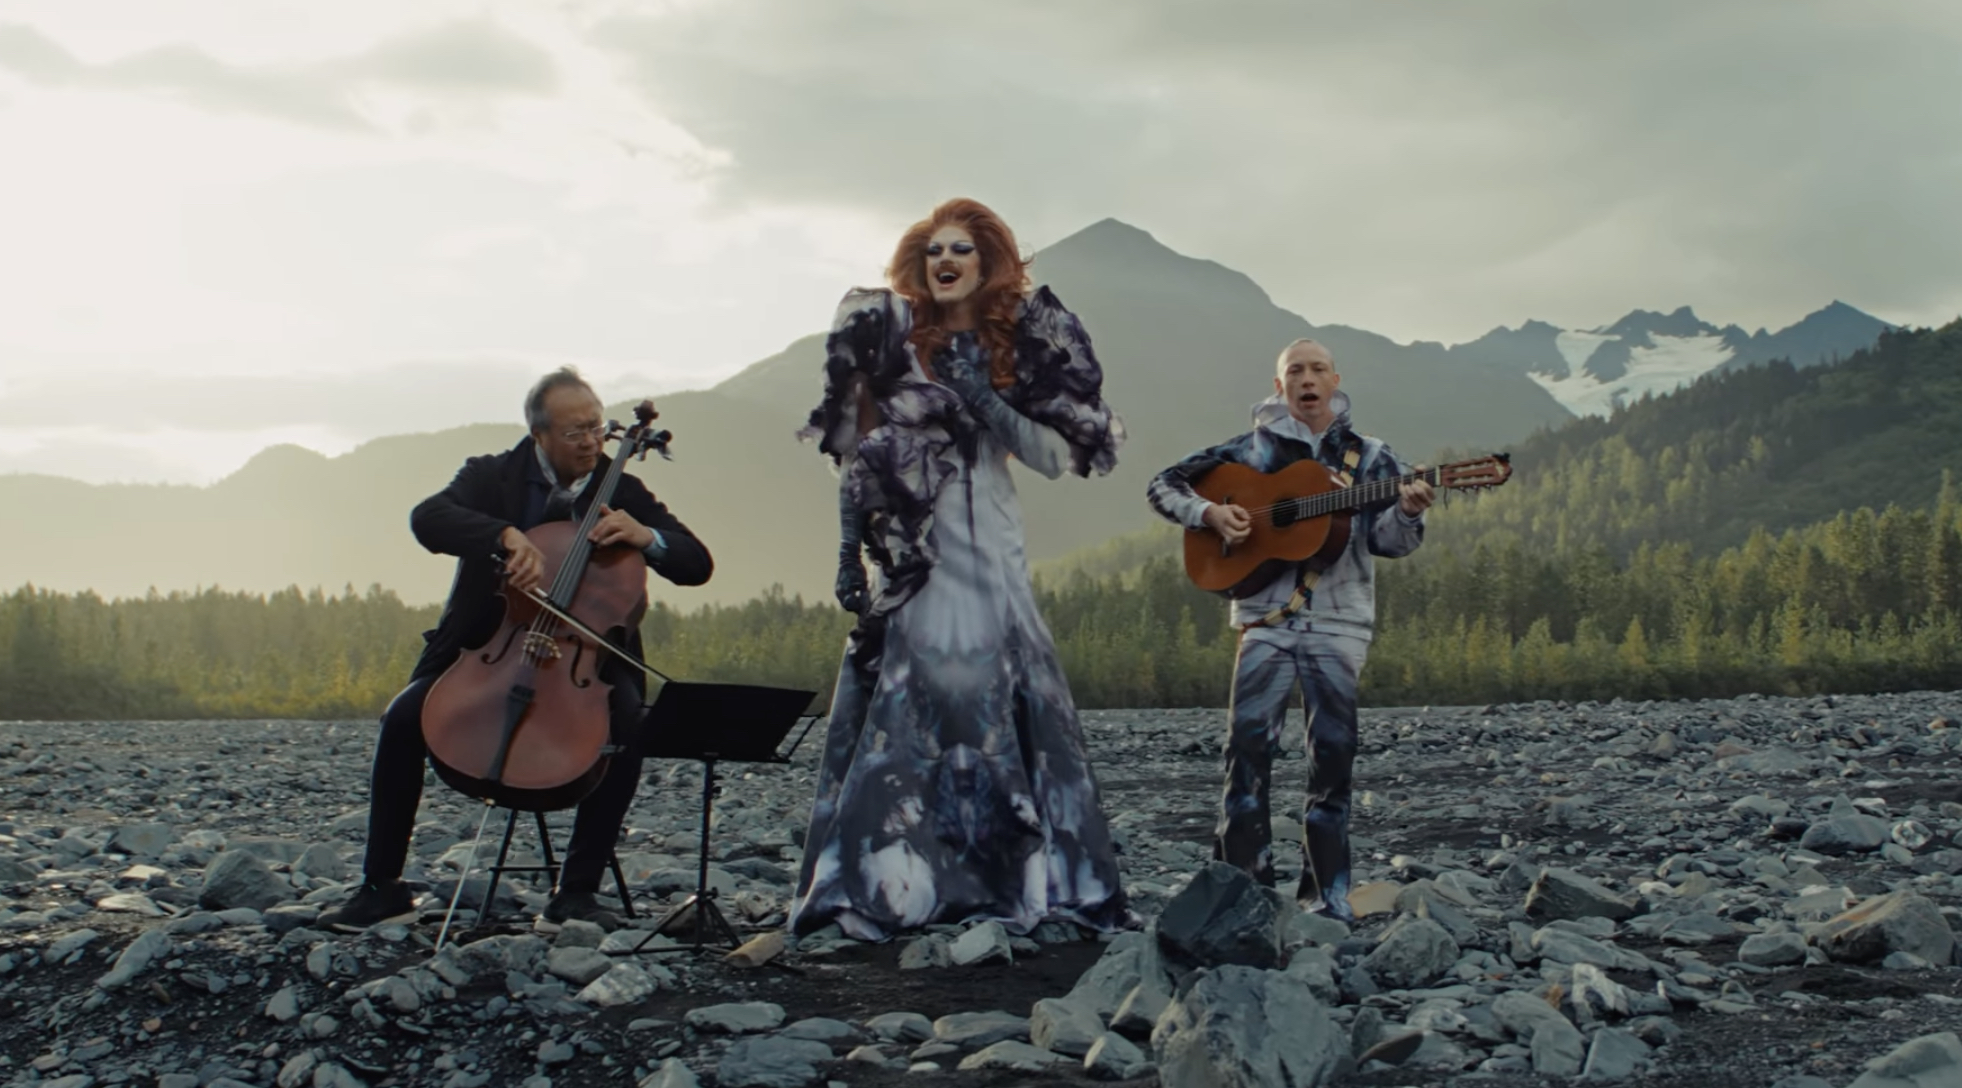 Renowned Cellist Yo-Yo Ma Collaborates with Drag Queen and Trans Singer to Create an Empowering Song Filled with Hope for the LGBTQ+ Community